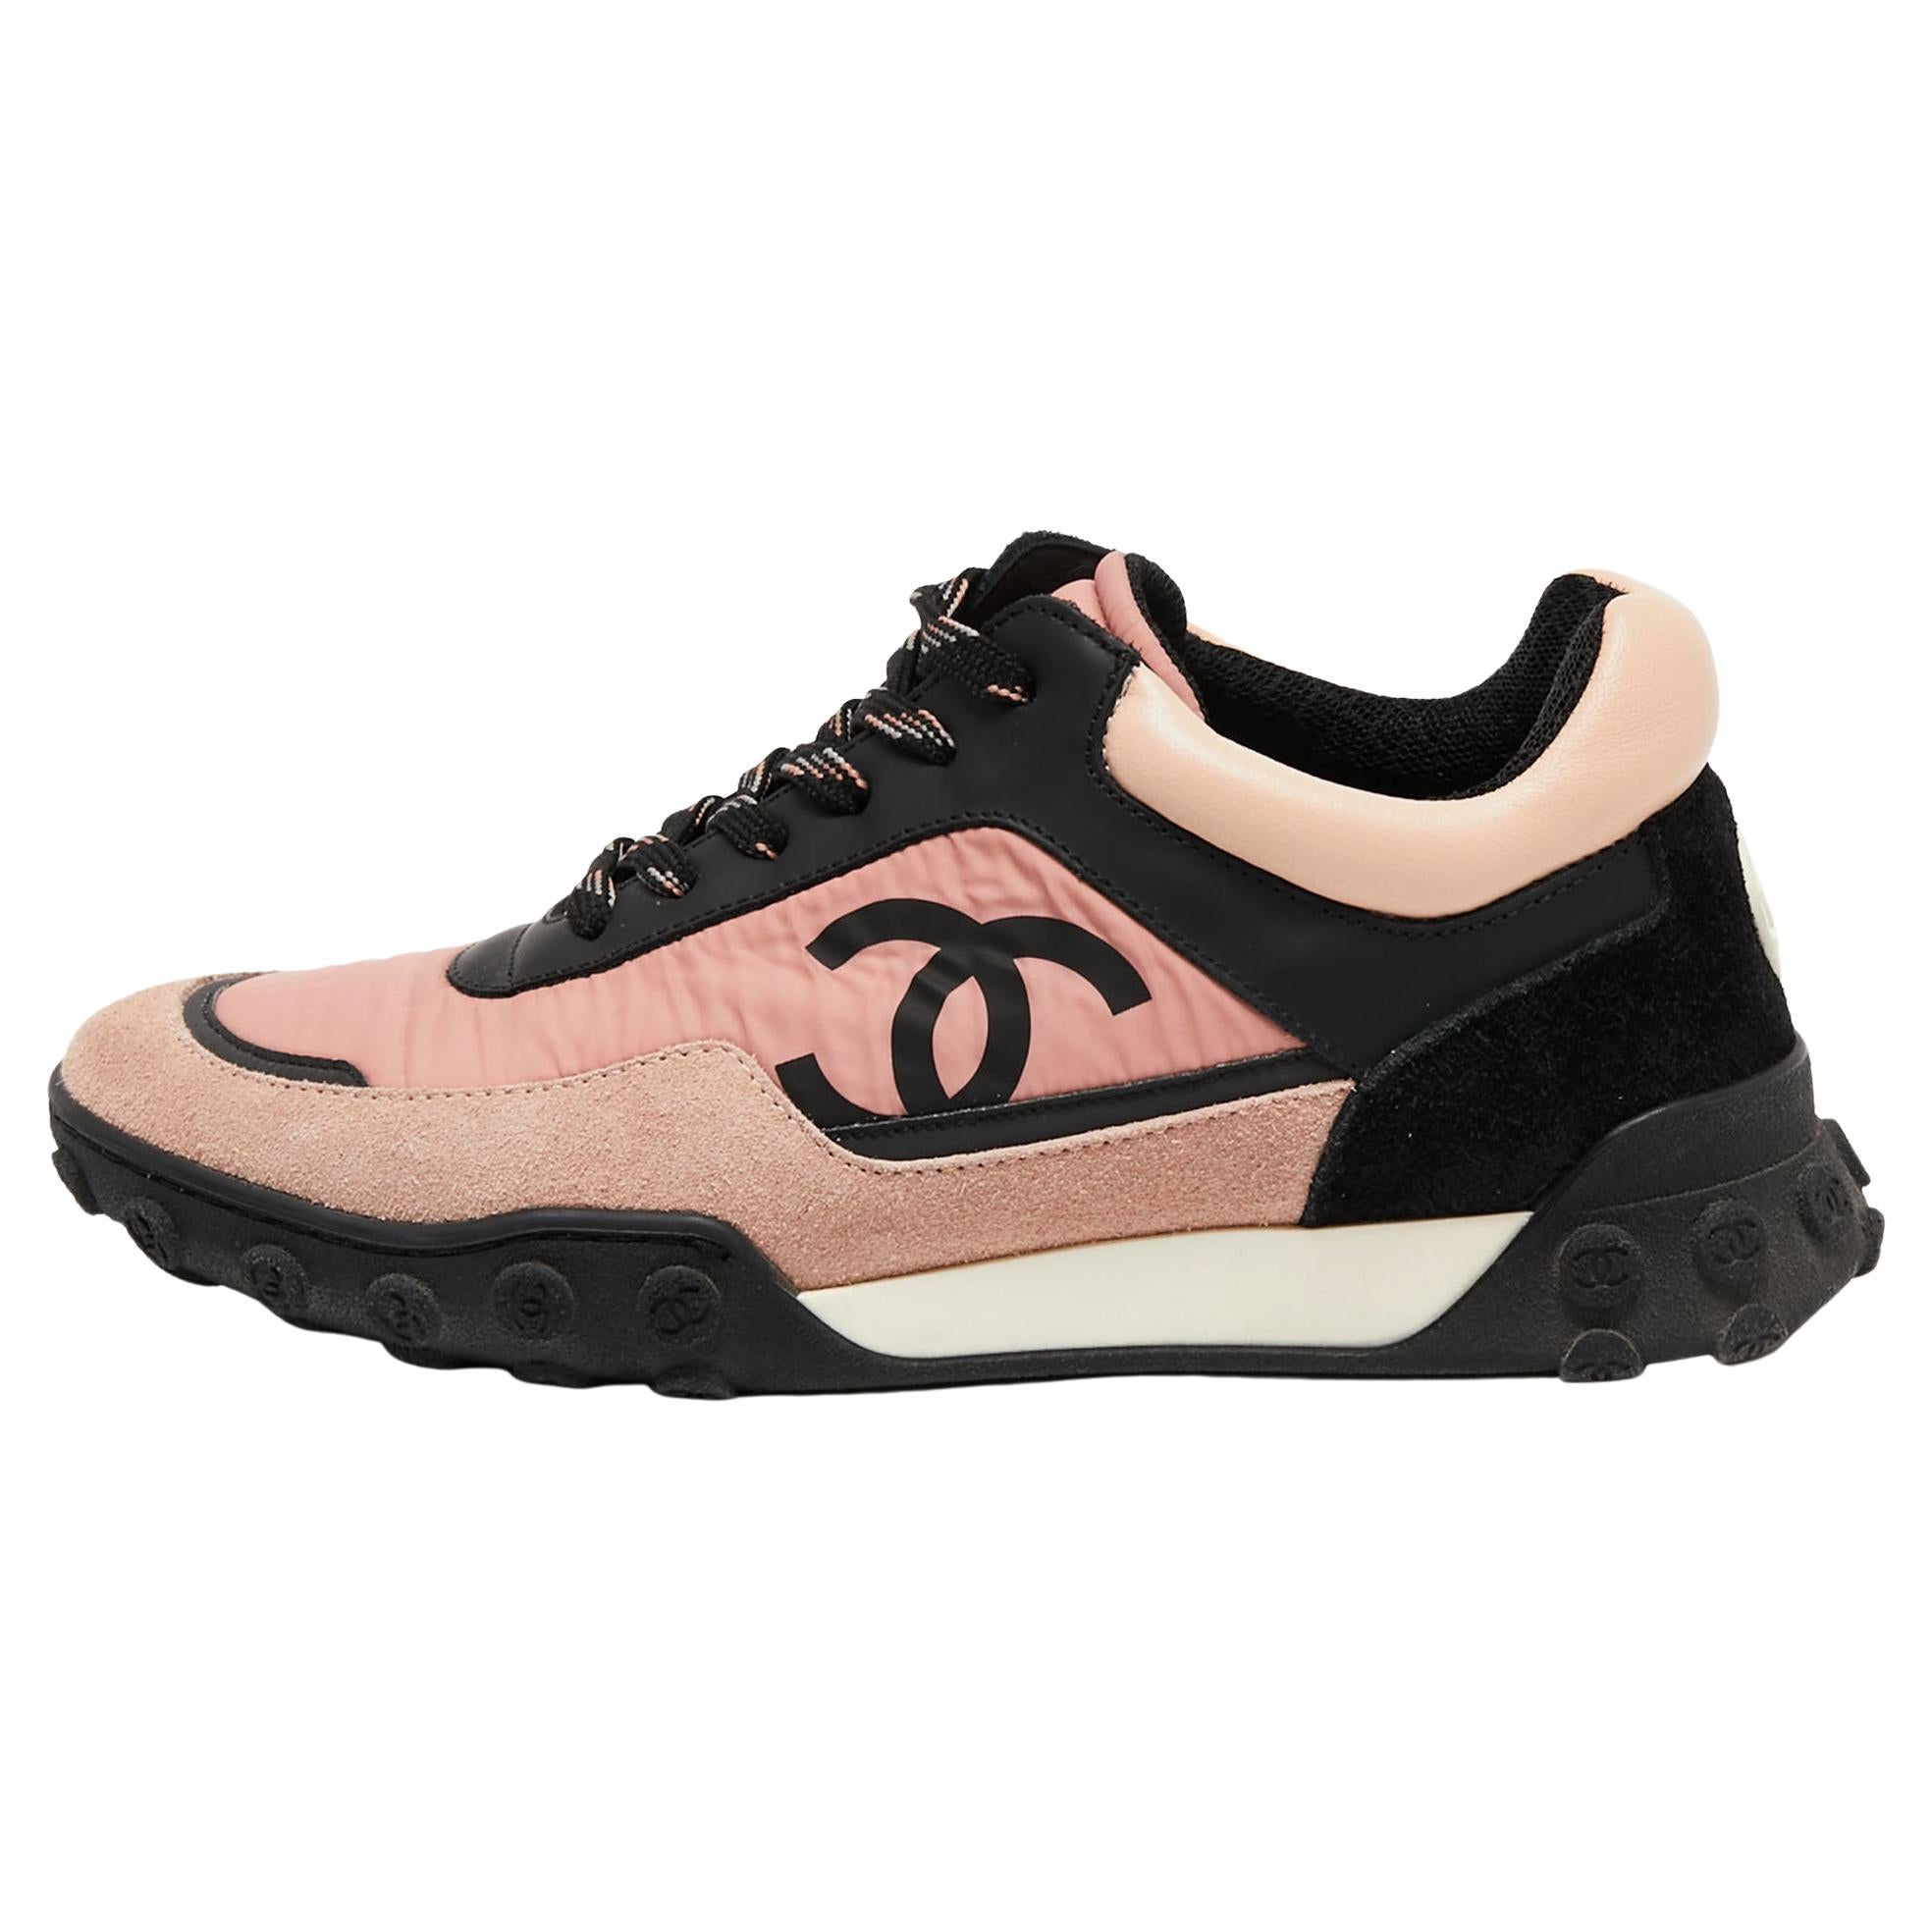 chanel sport shoes